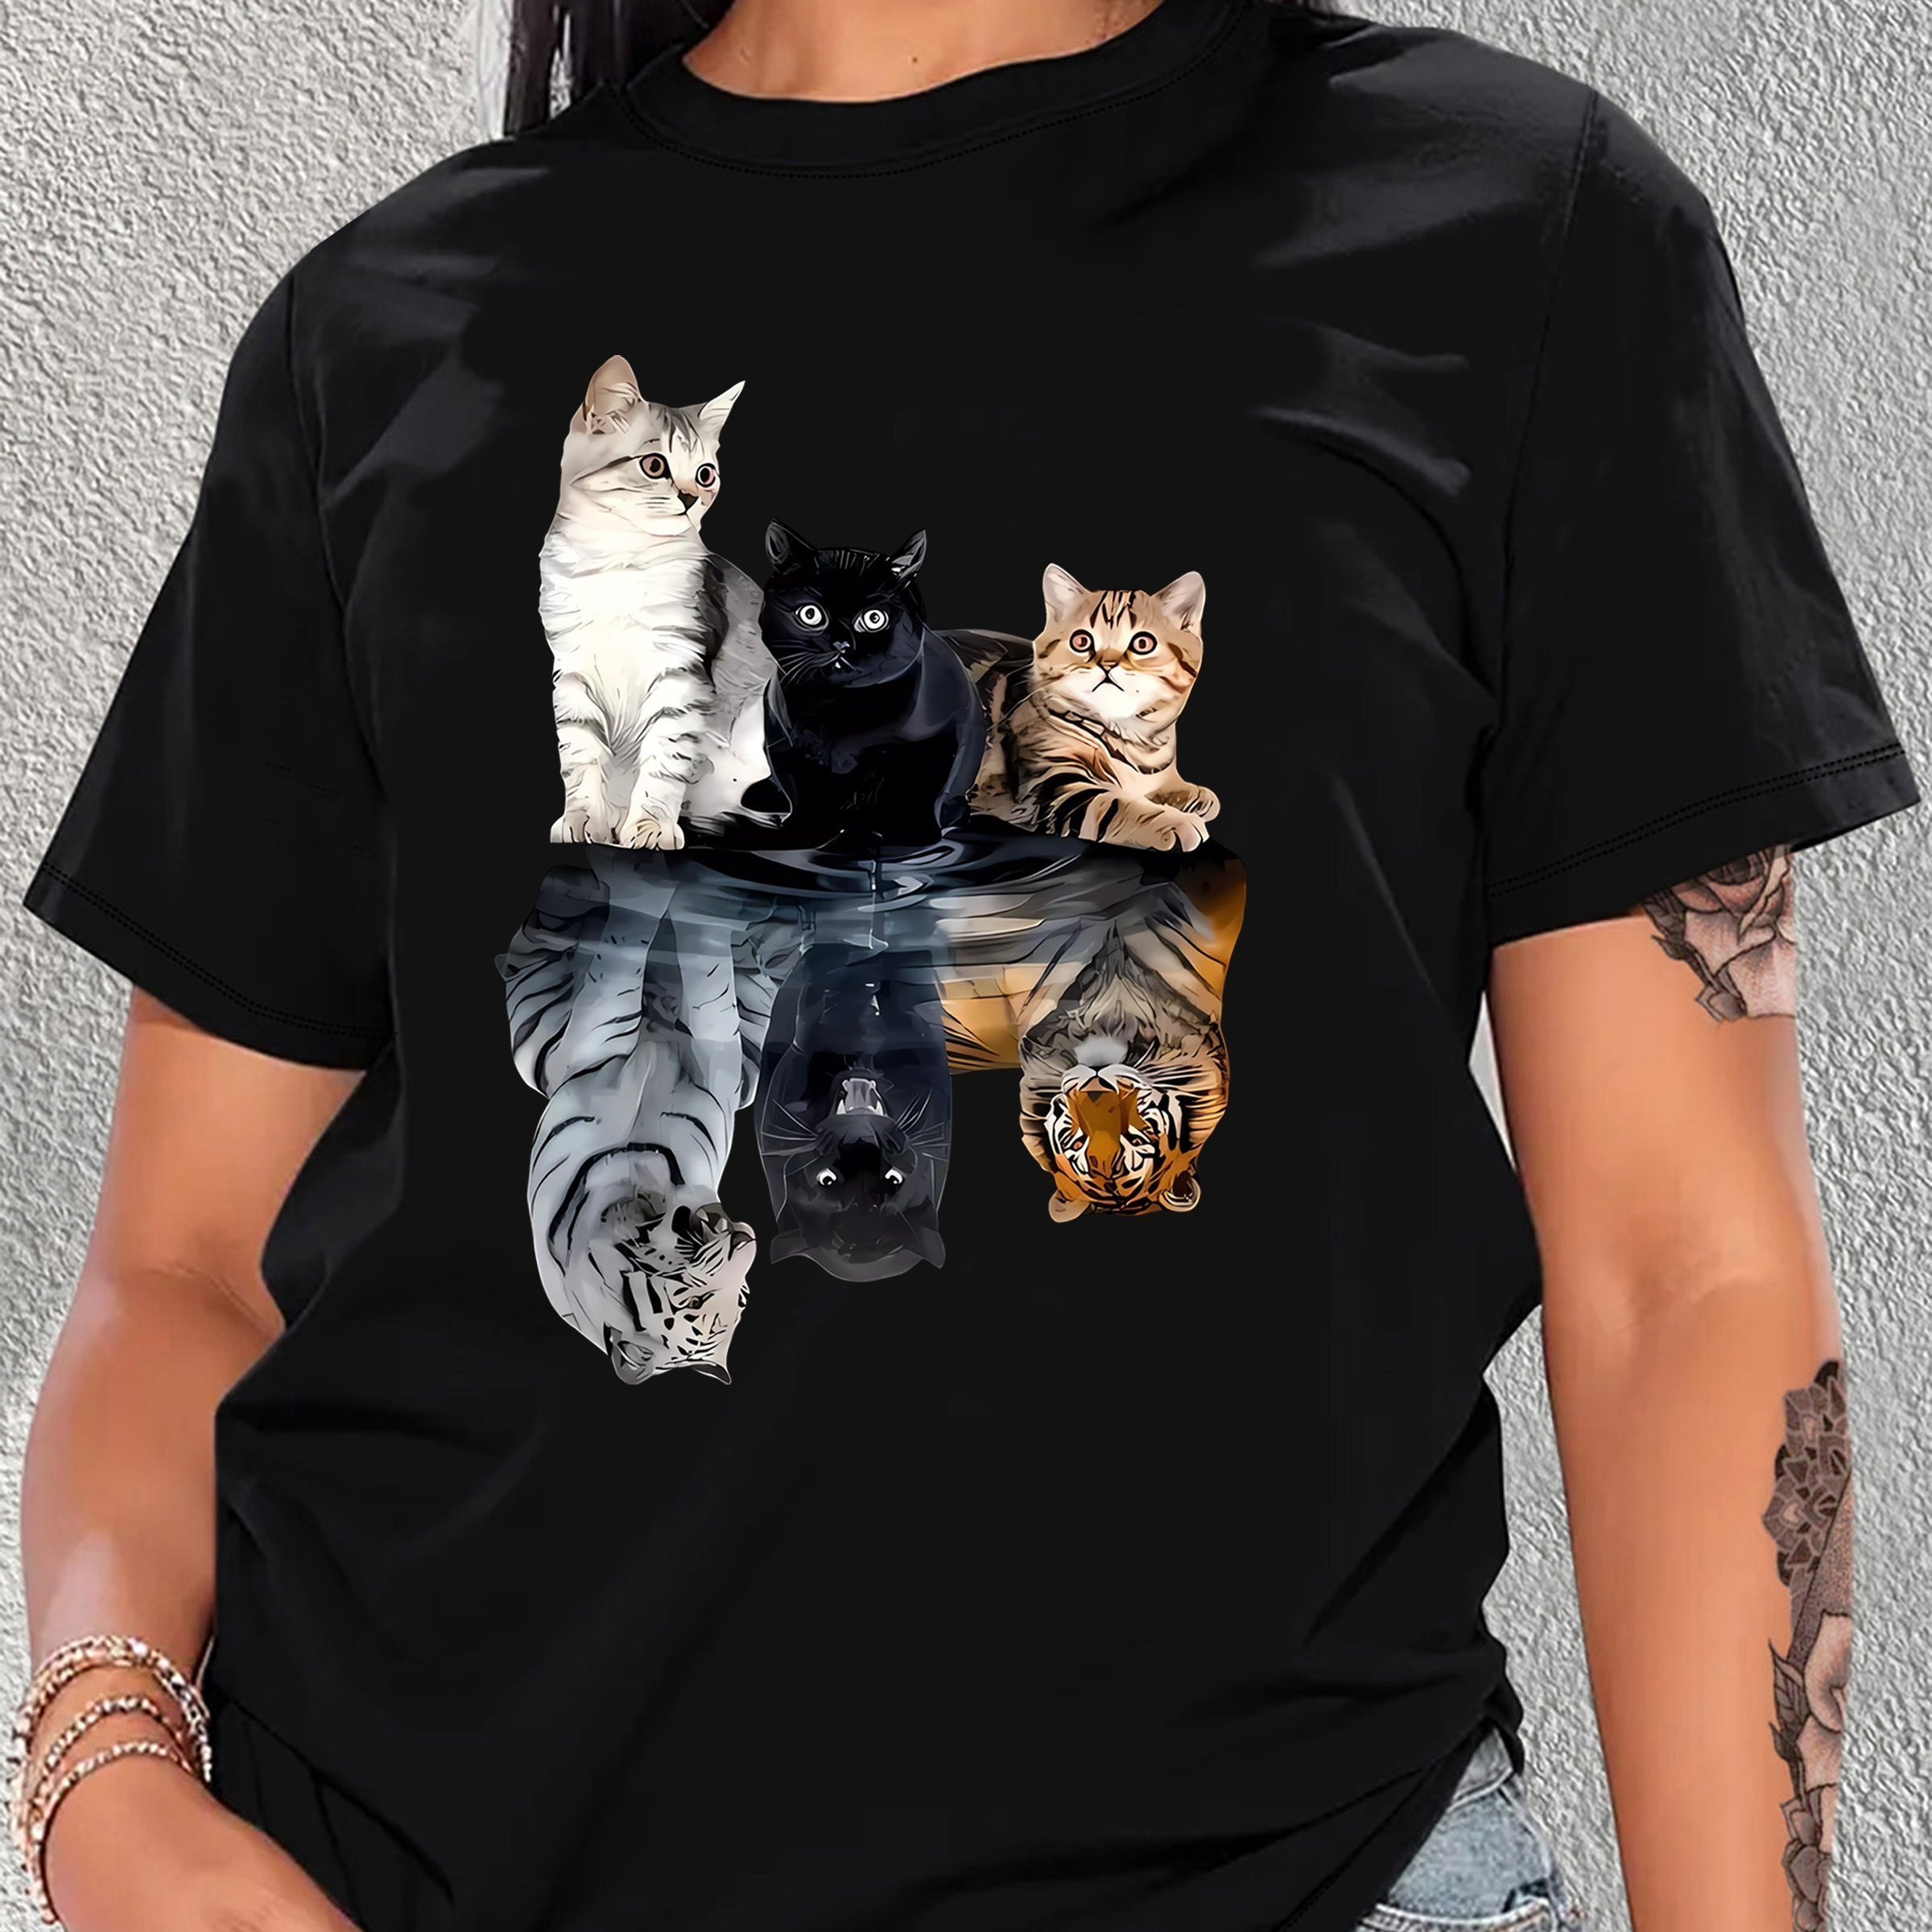 

Women's Casual Fashion T-shirt, Cute Cat And Tiger Print, Round Neck, Short Sleeve, Top